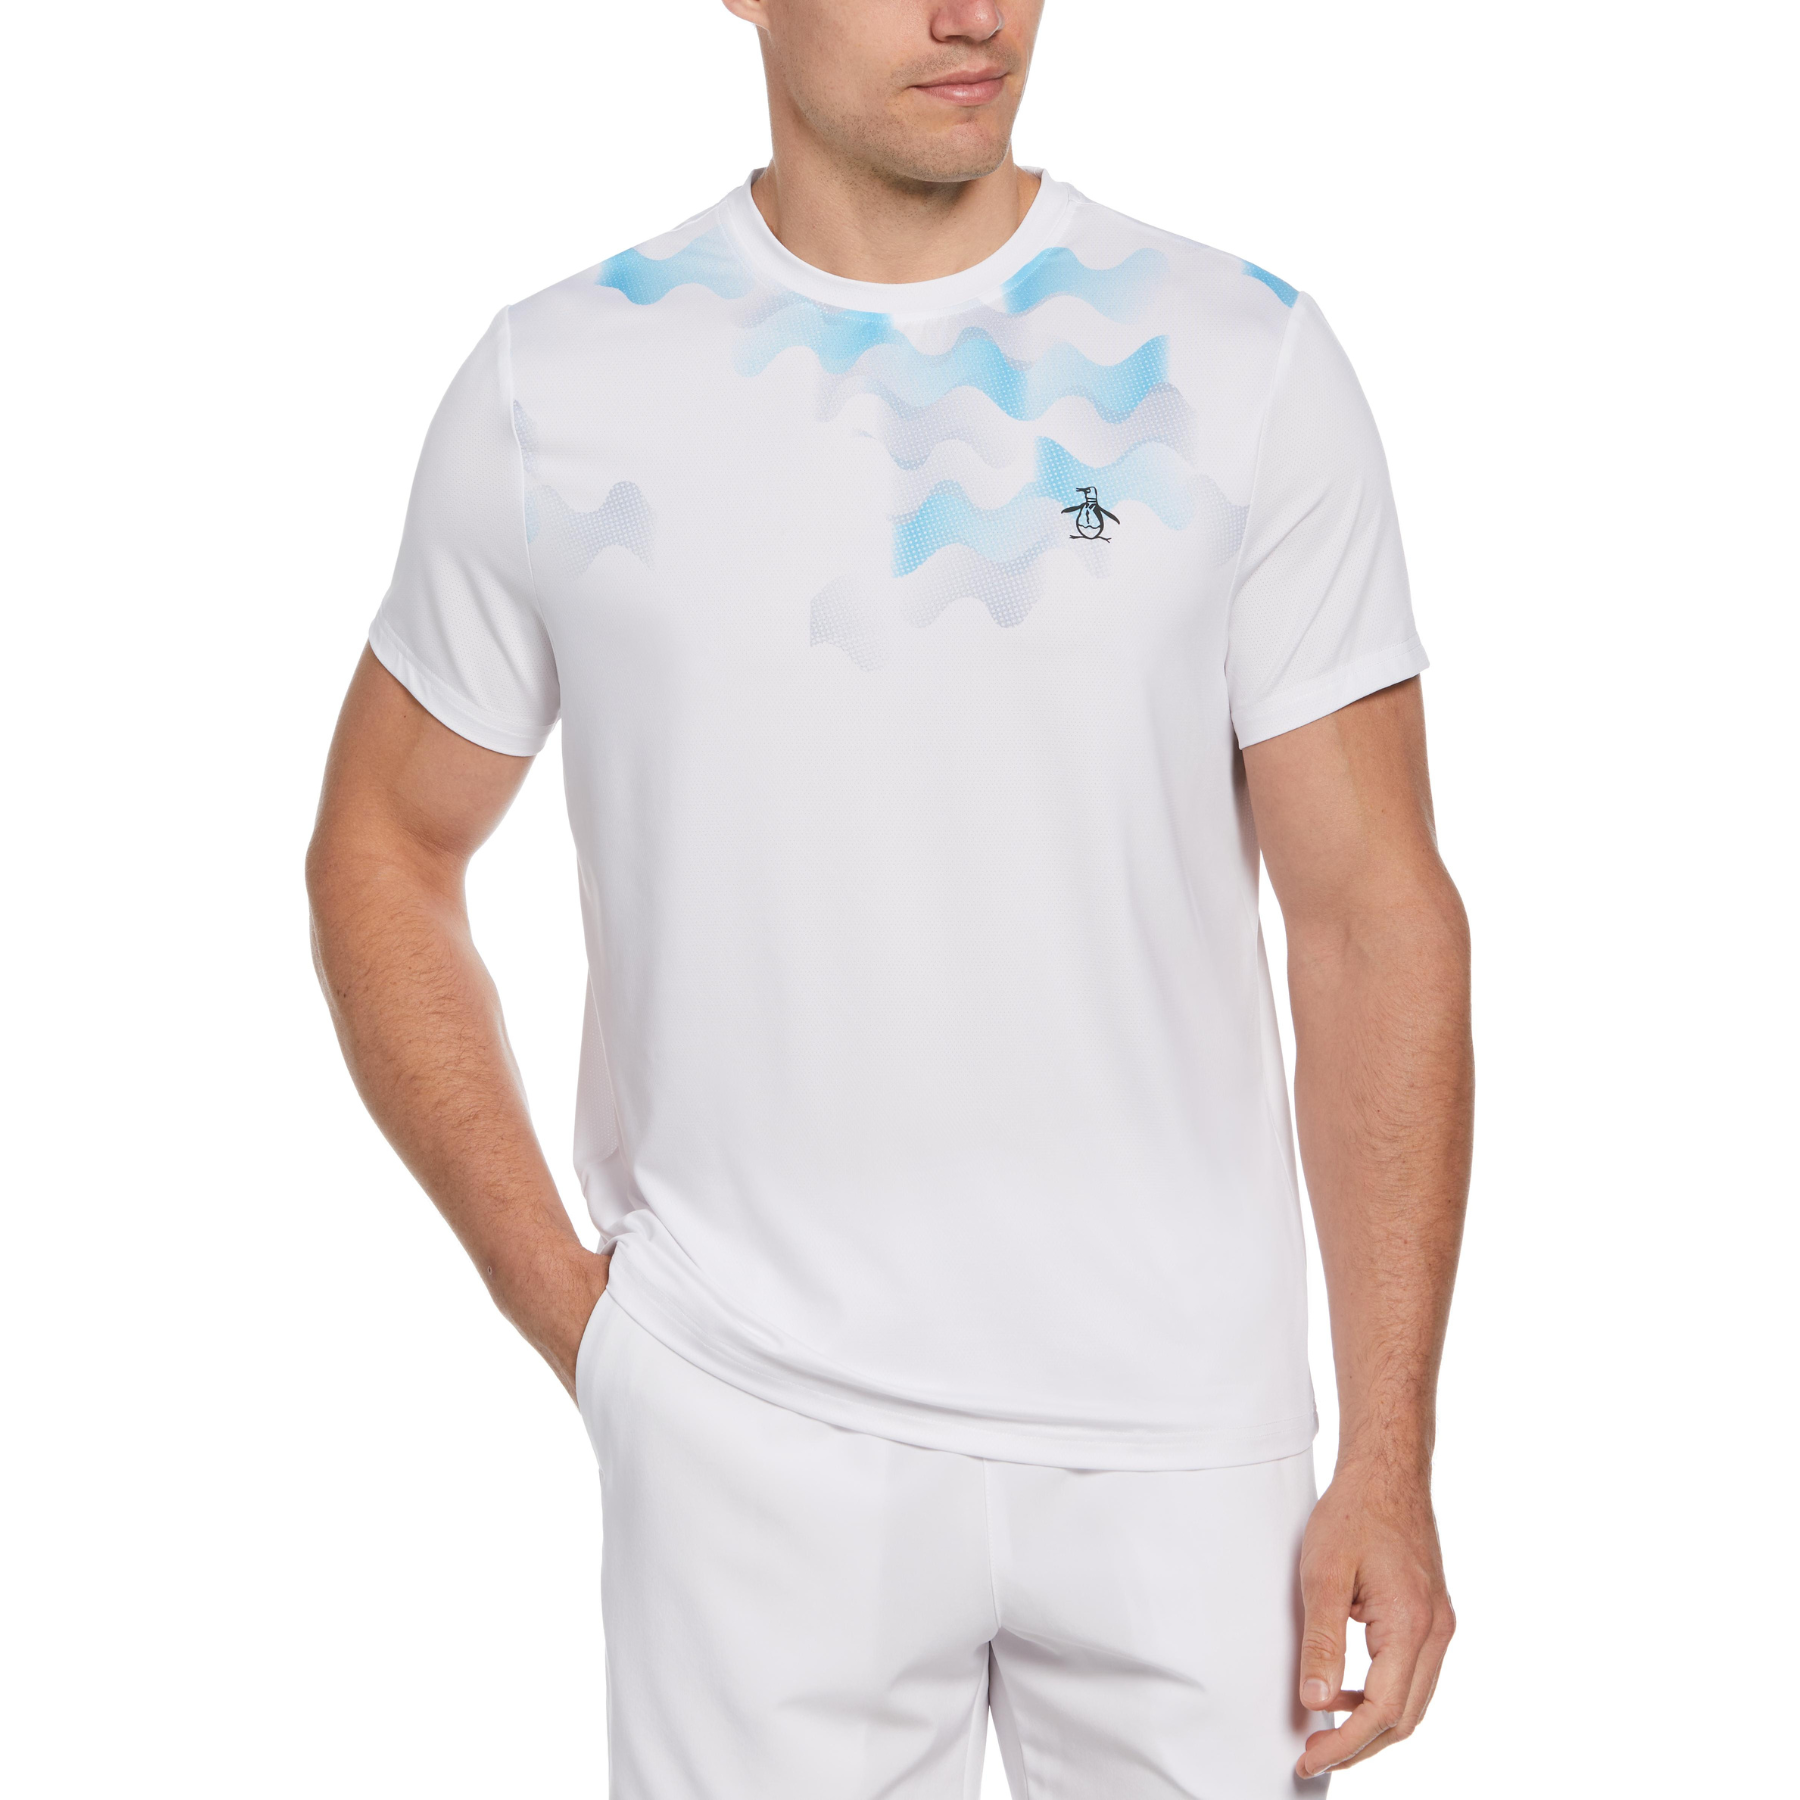 View Motion Ball Performance Tennis TShirt In Bright White information